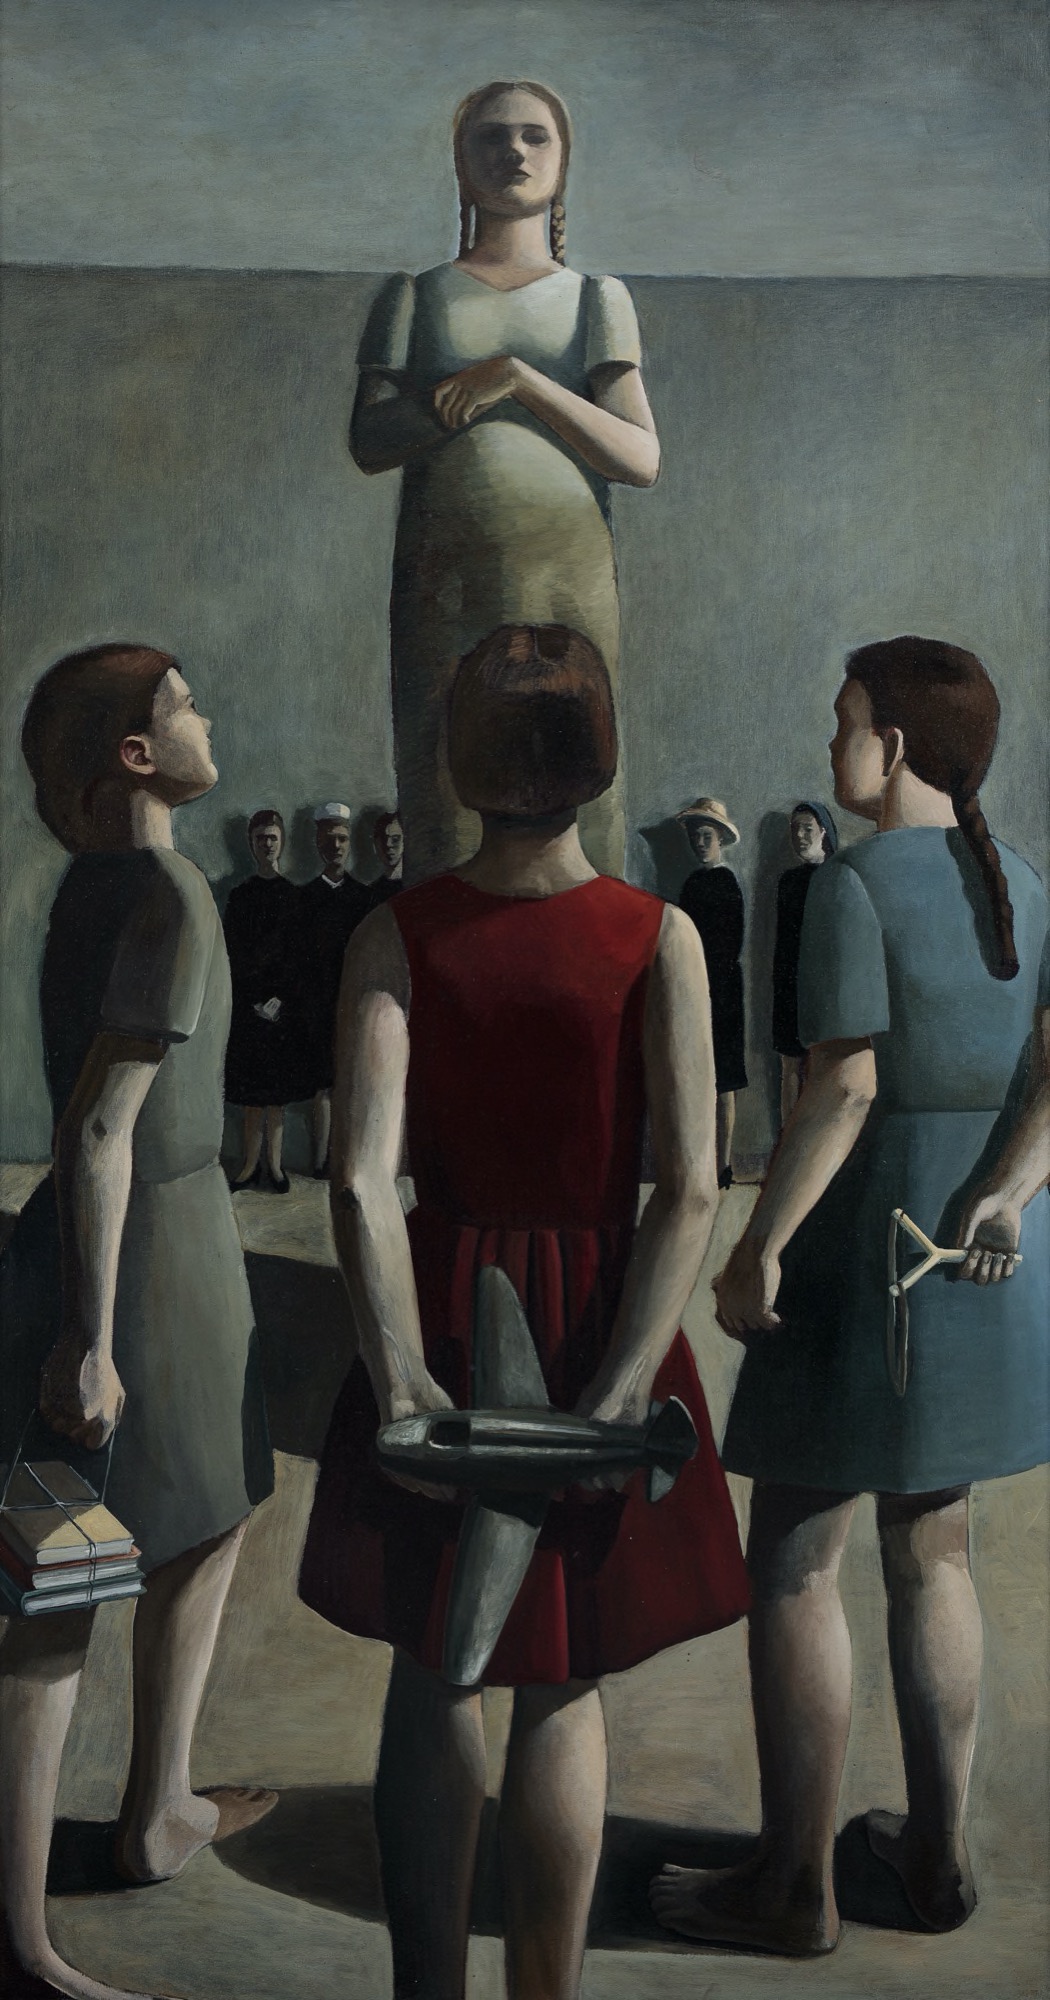 Anne Wallace, Exemplar, 1993. Oil on canvas, 174 x 94cm. Courtesy of the Art Gallery of Ballarat.